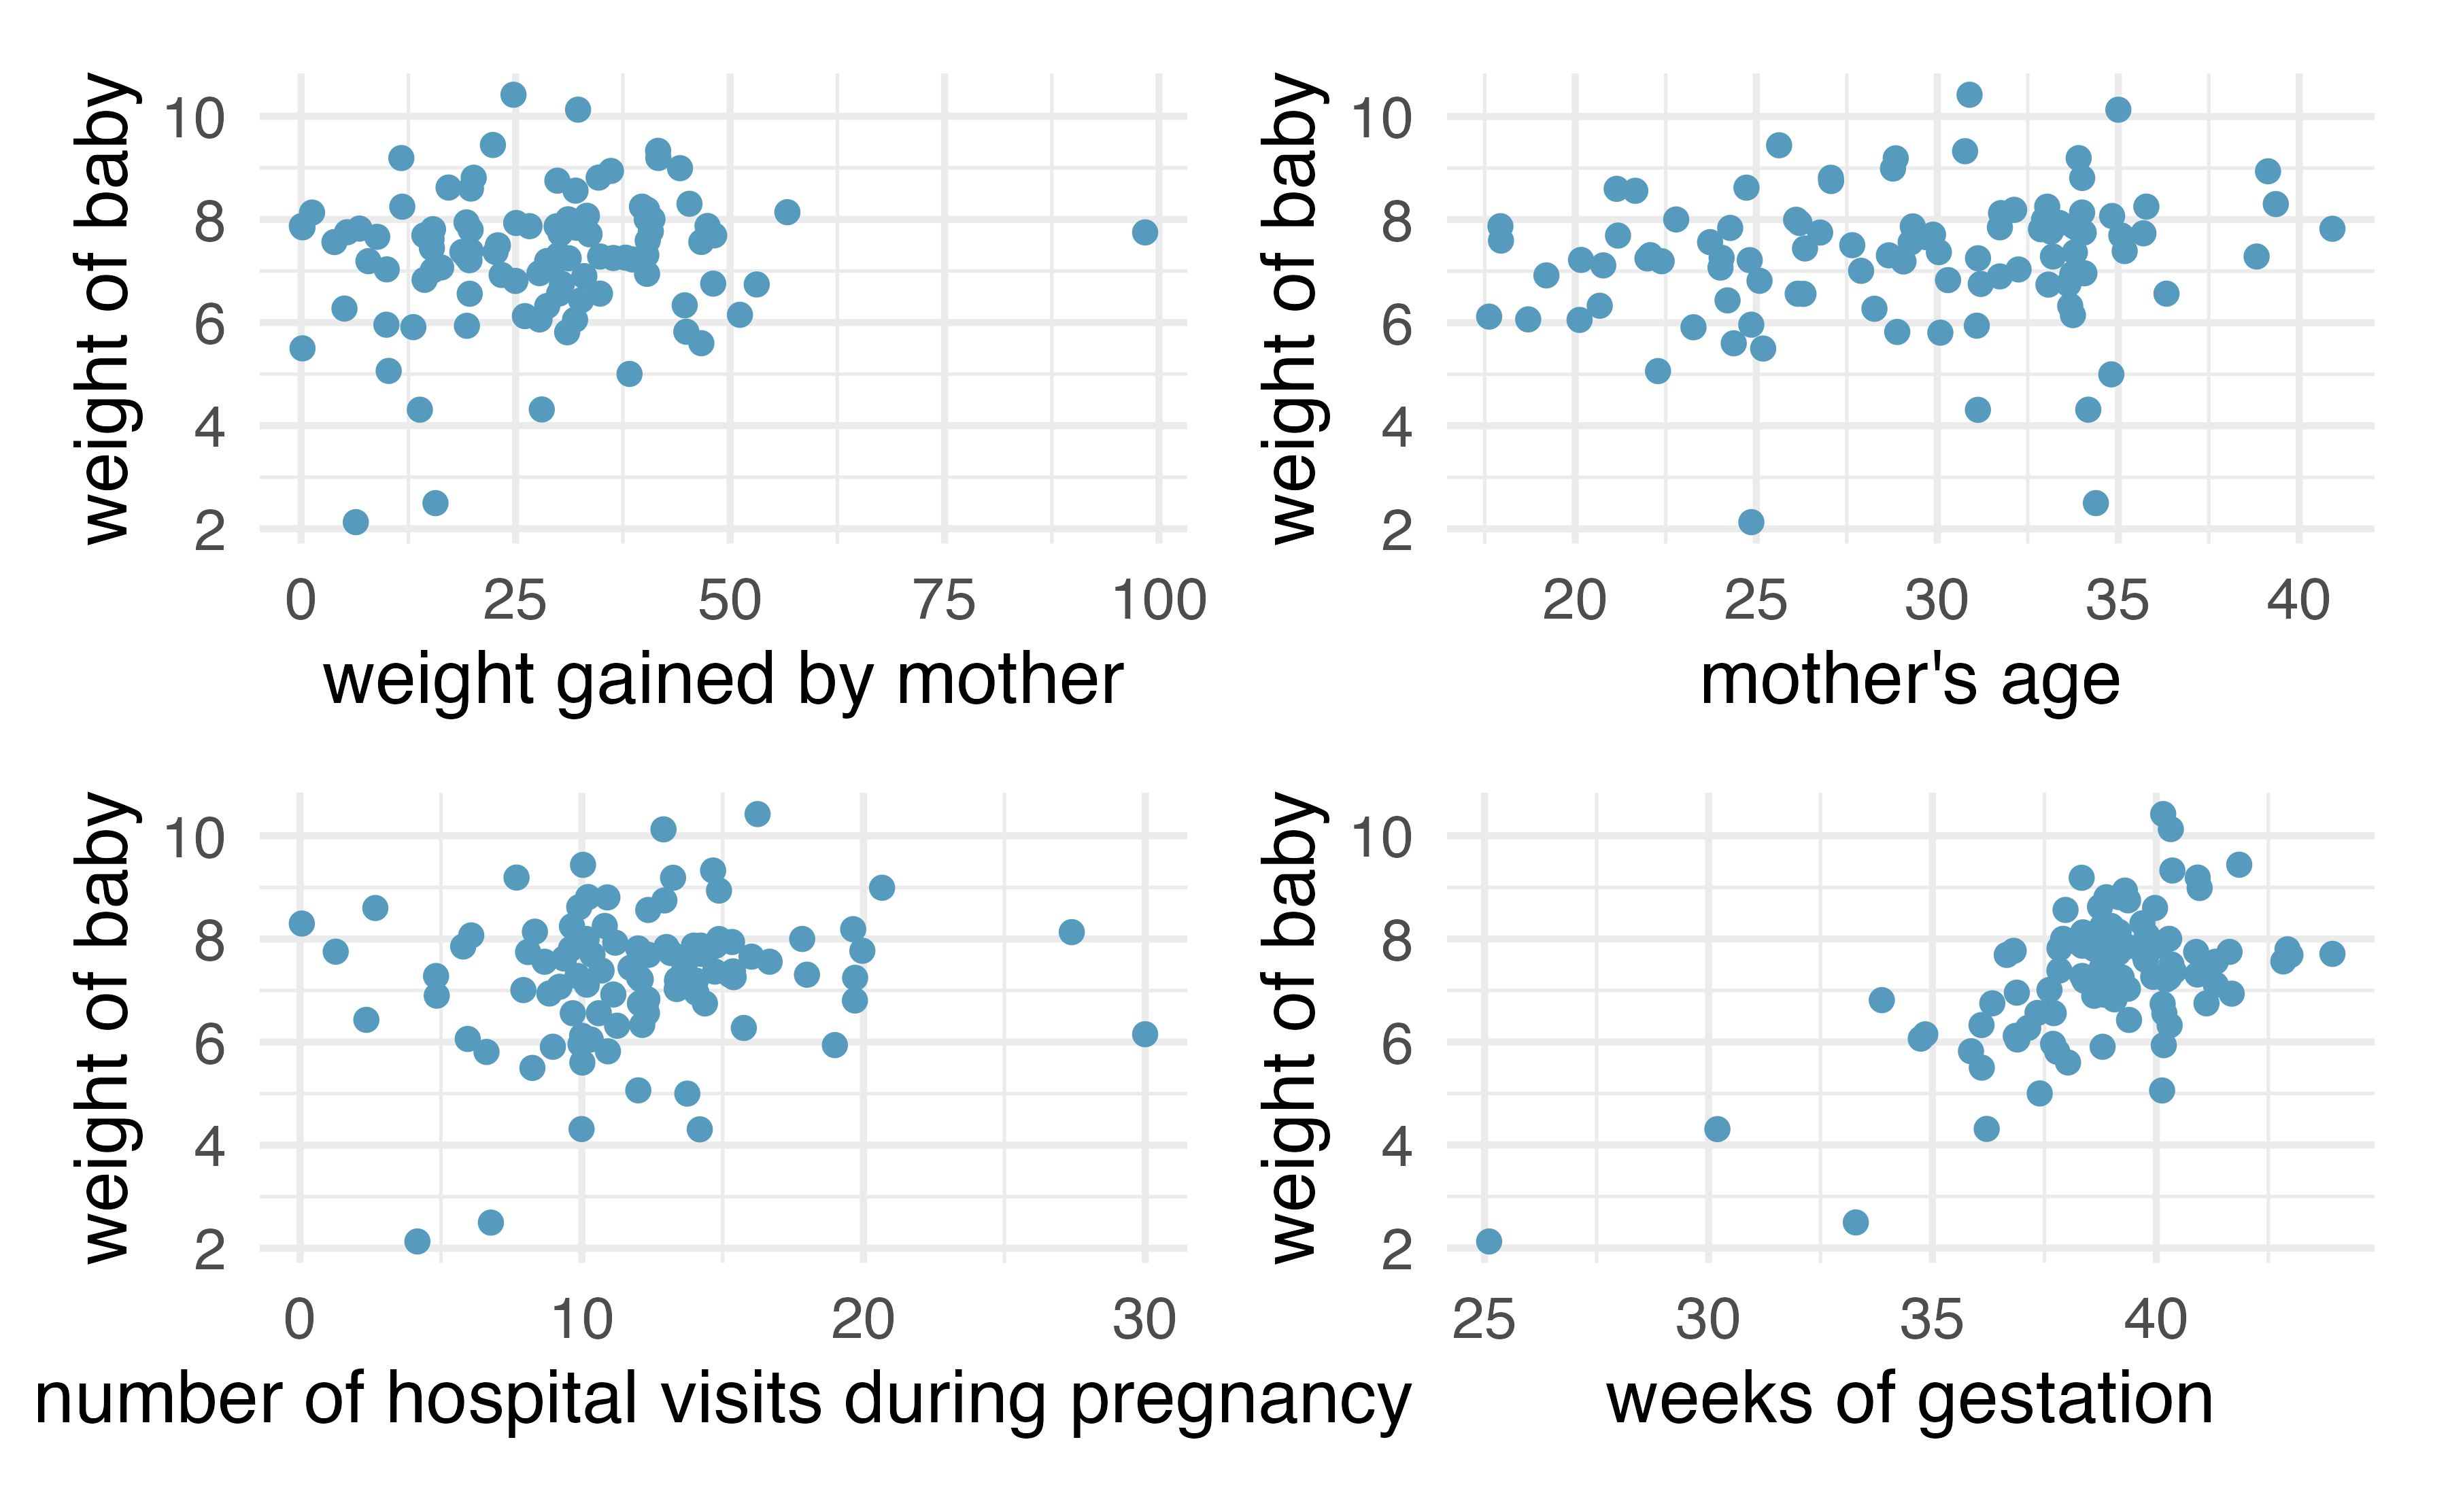 Weight of baby at birth (in lbs) as plotted by four other birth variables (mother's weight gain, mother's age, number of hospital visits, and weeks gestation).